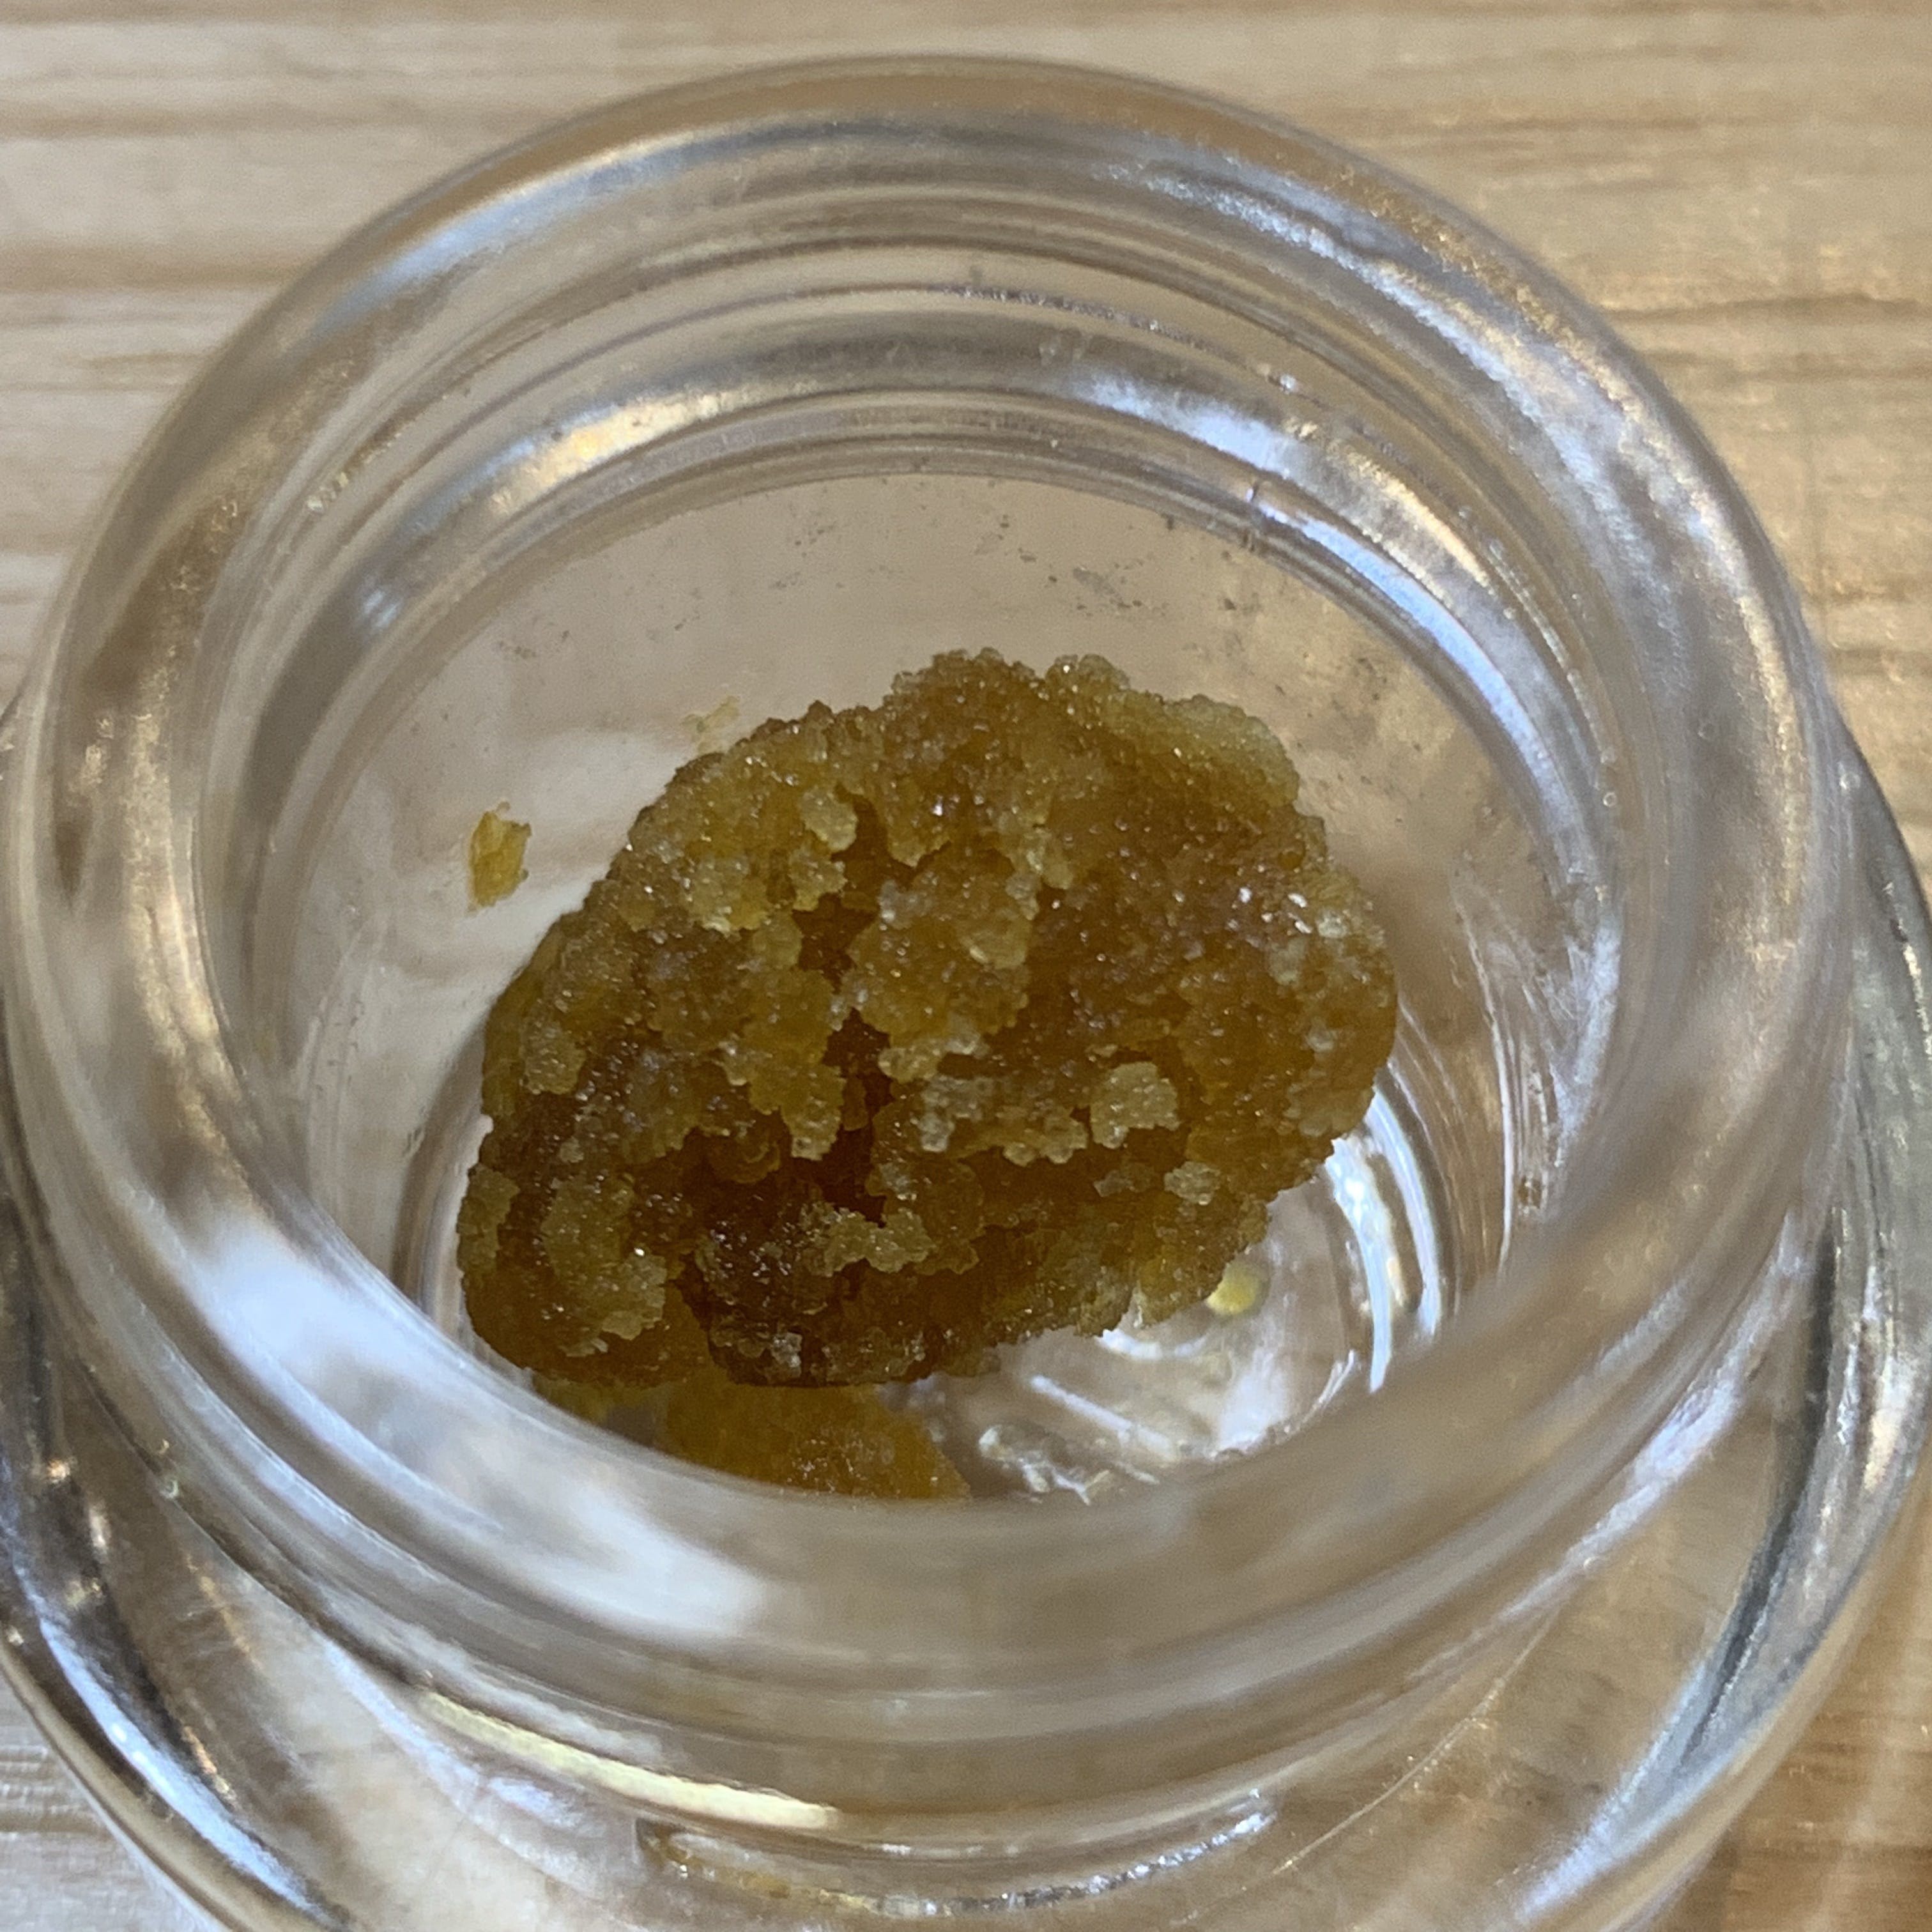 concentrate-grassroots-sugar-willies-tour-bus-1g